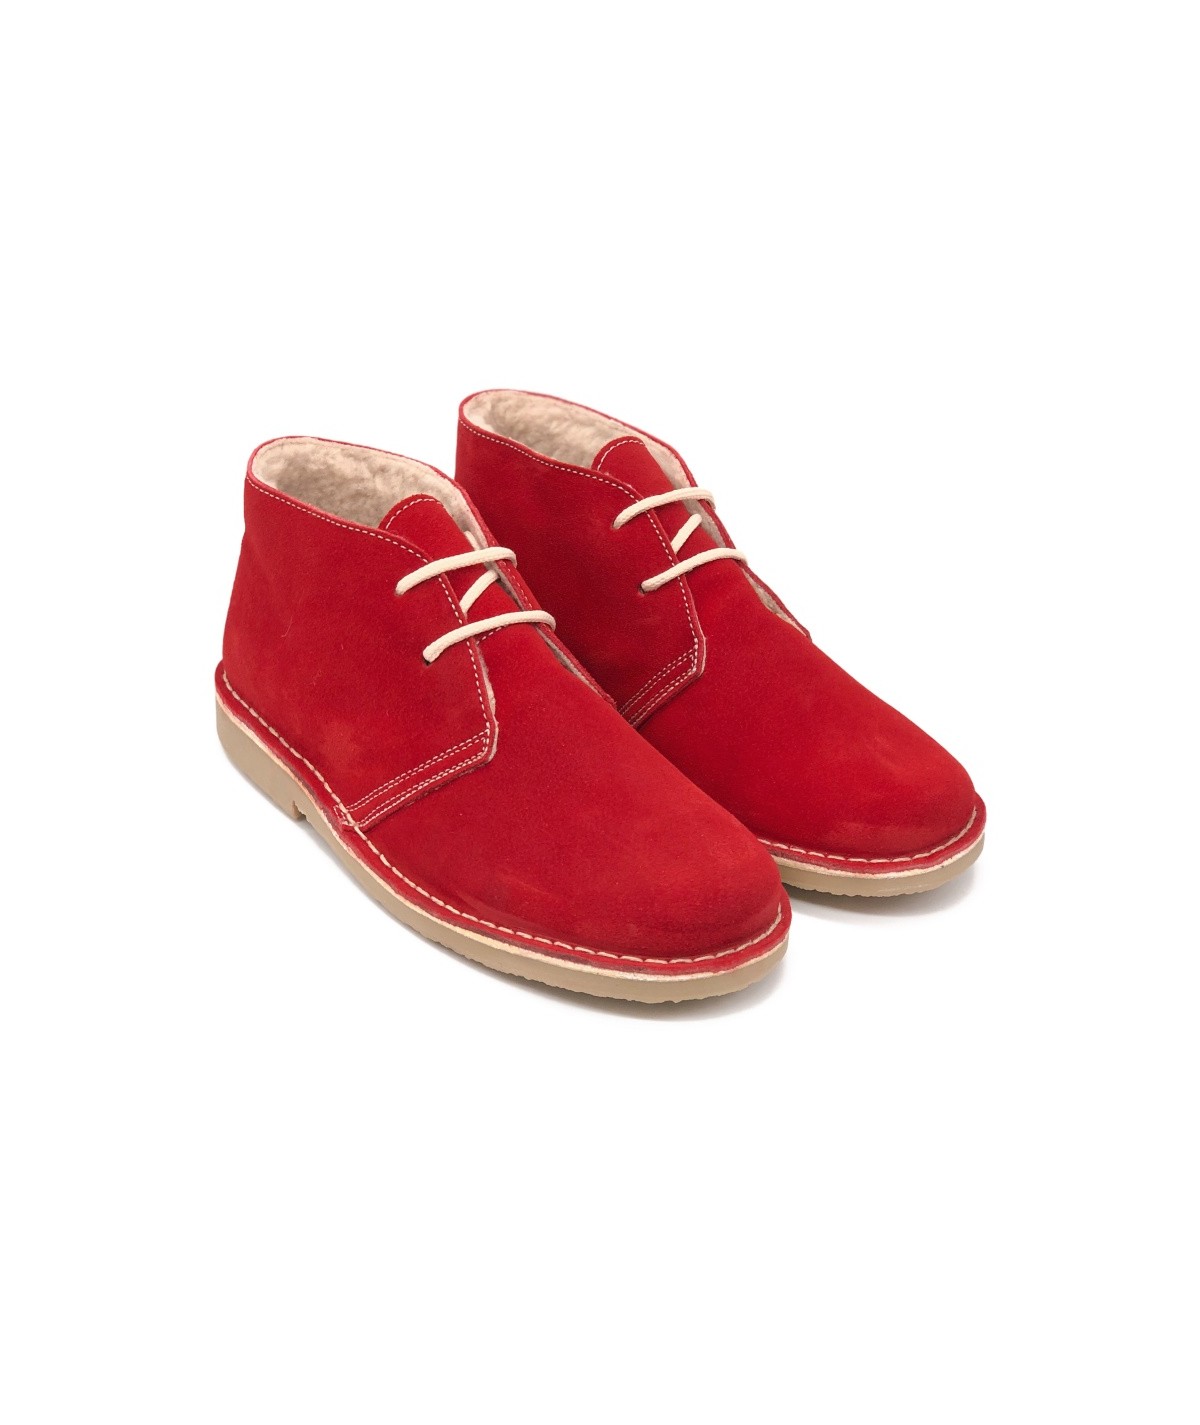 Men's Shearling Lined Red Desert Boots